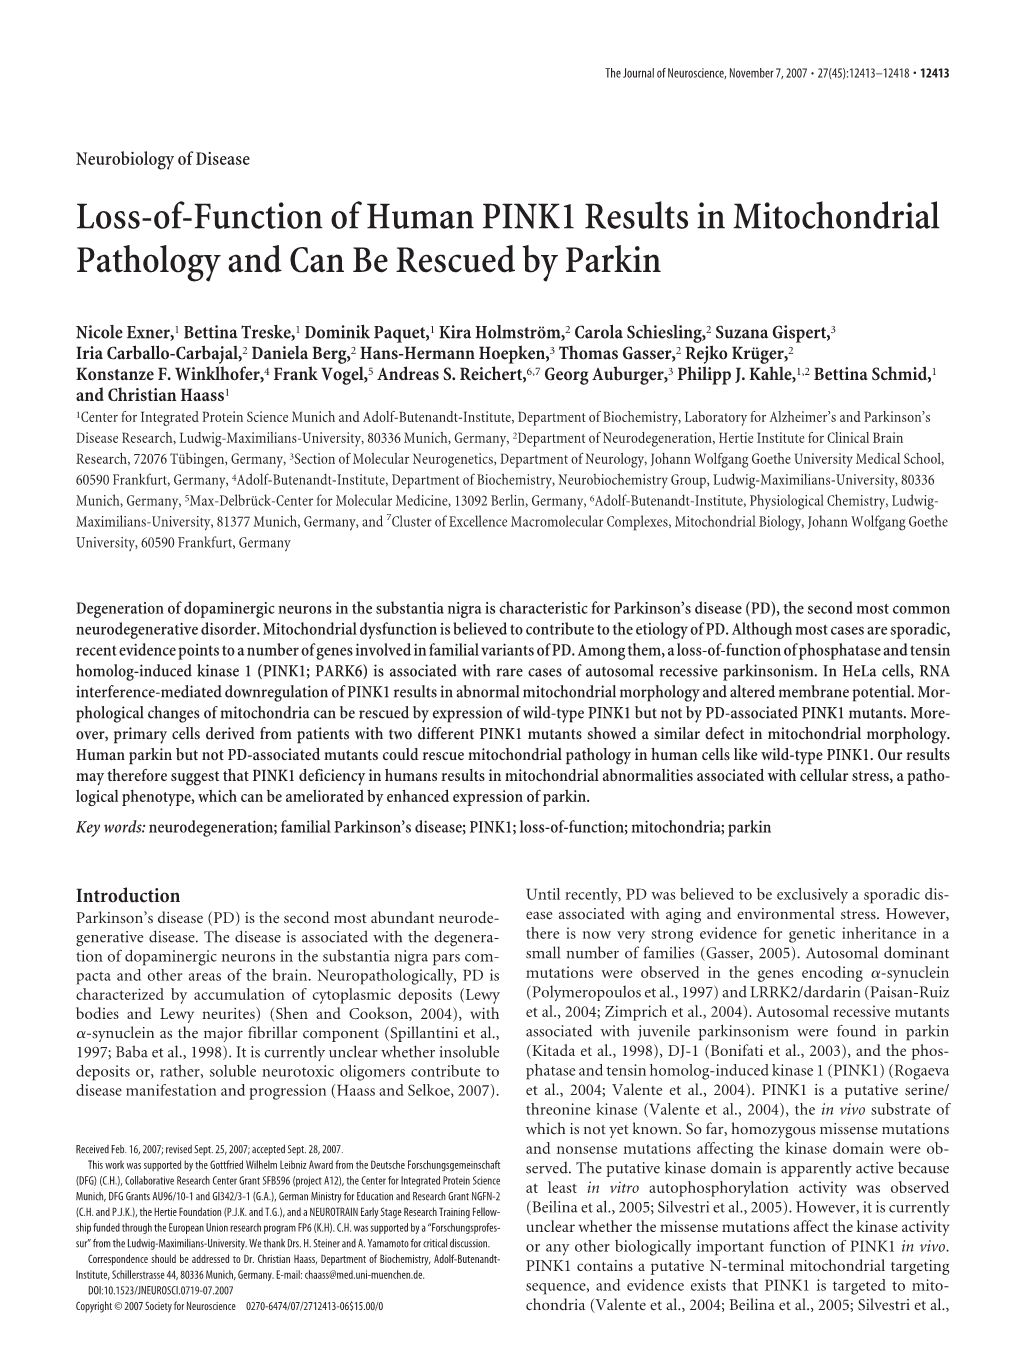 Loss-Of-Function of Human PINK1 Results in Mitochondrial Pathology and Can Be Rescued by Parkin